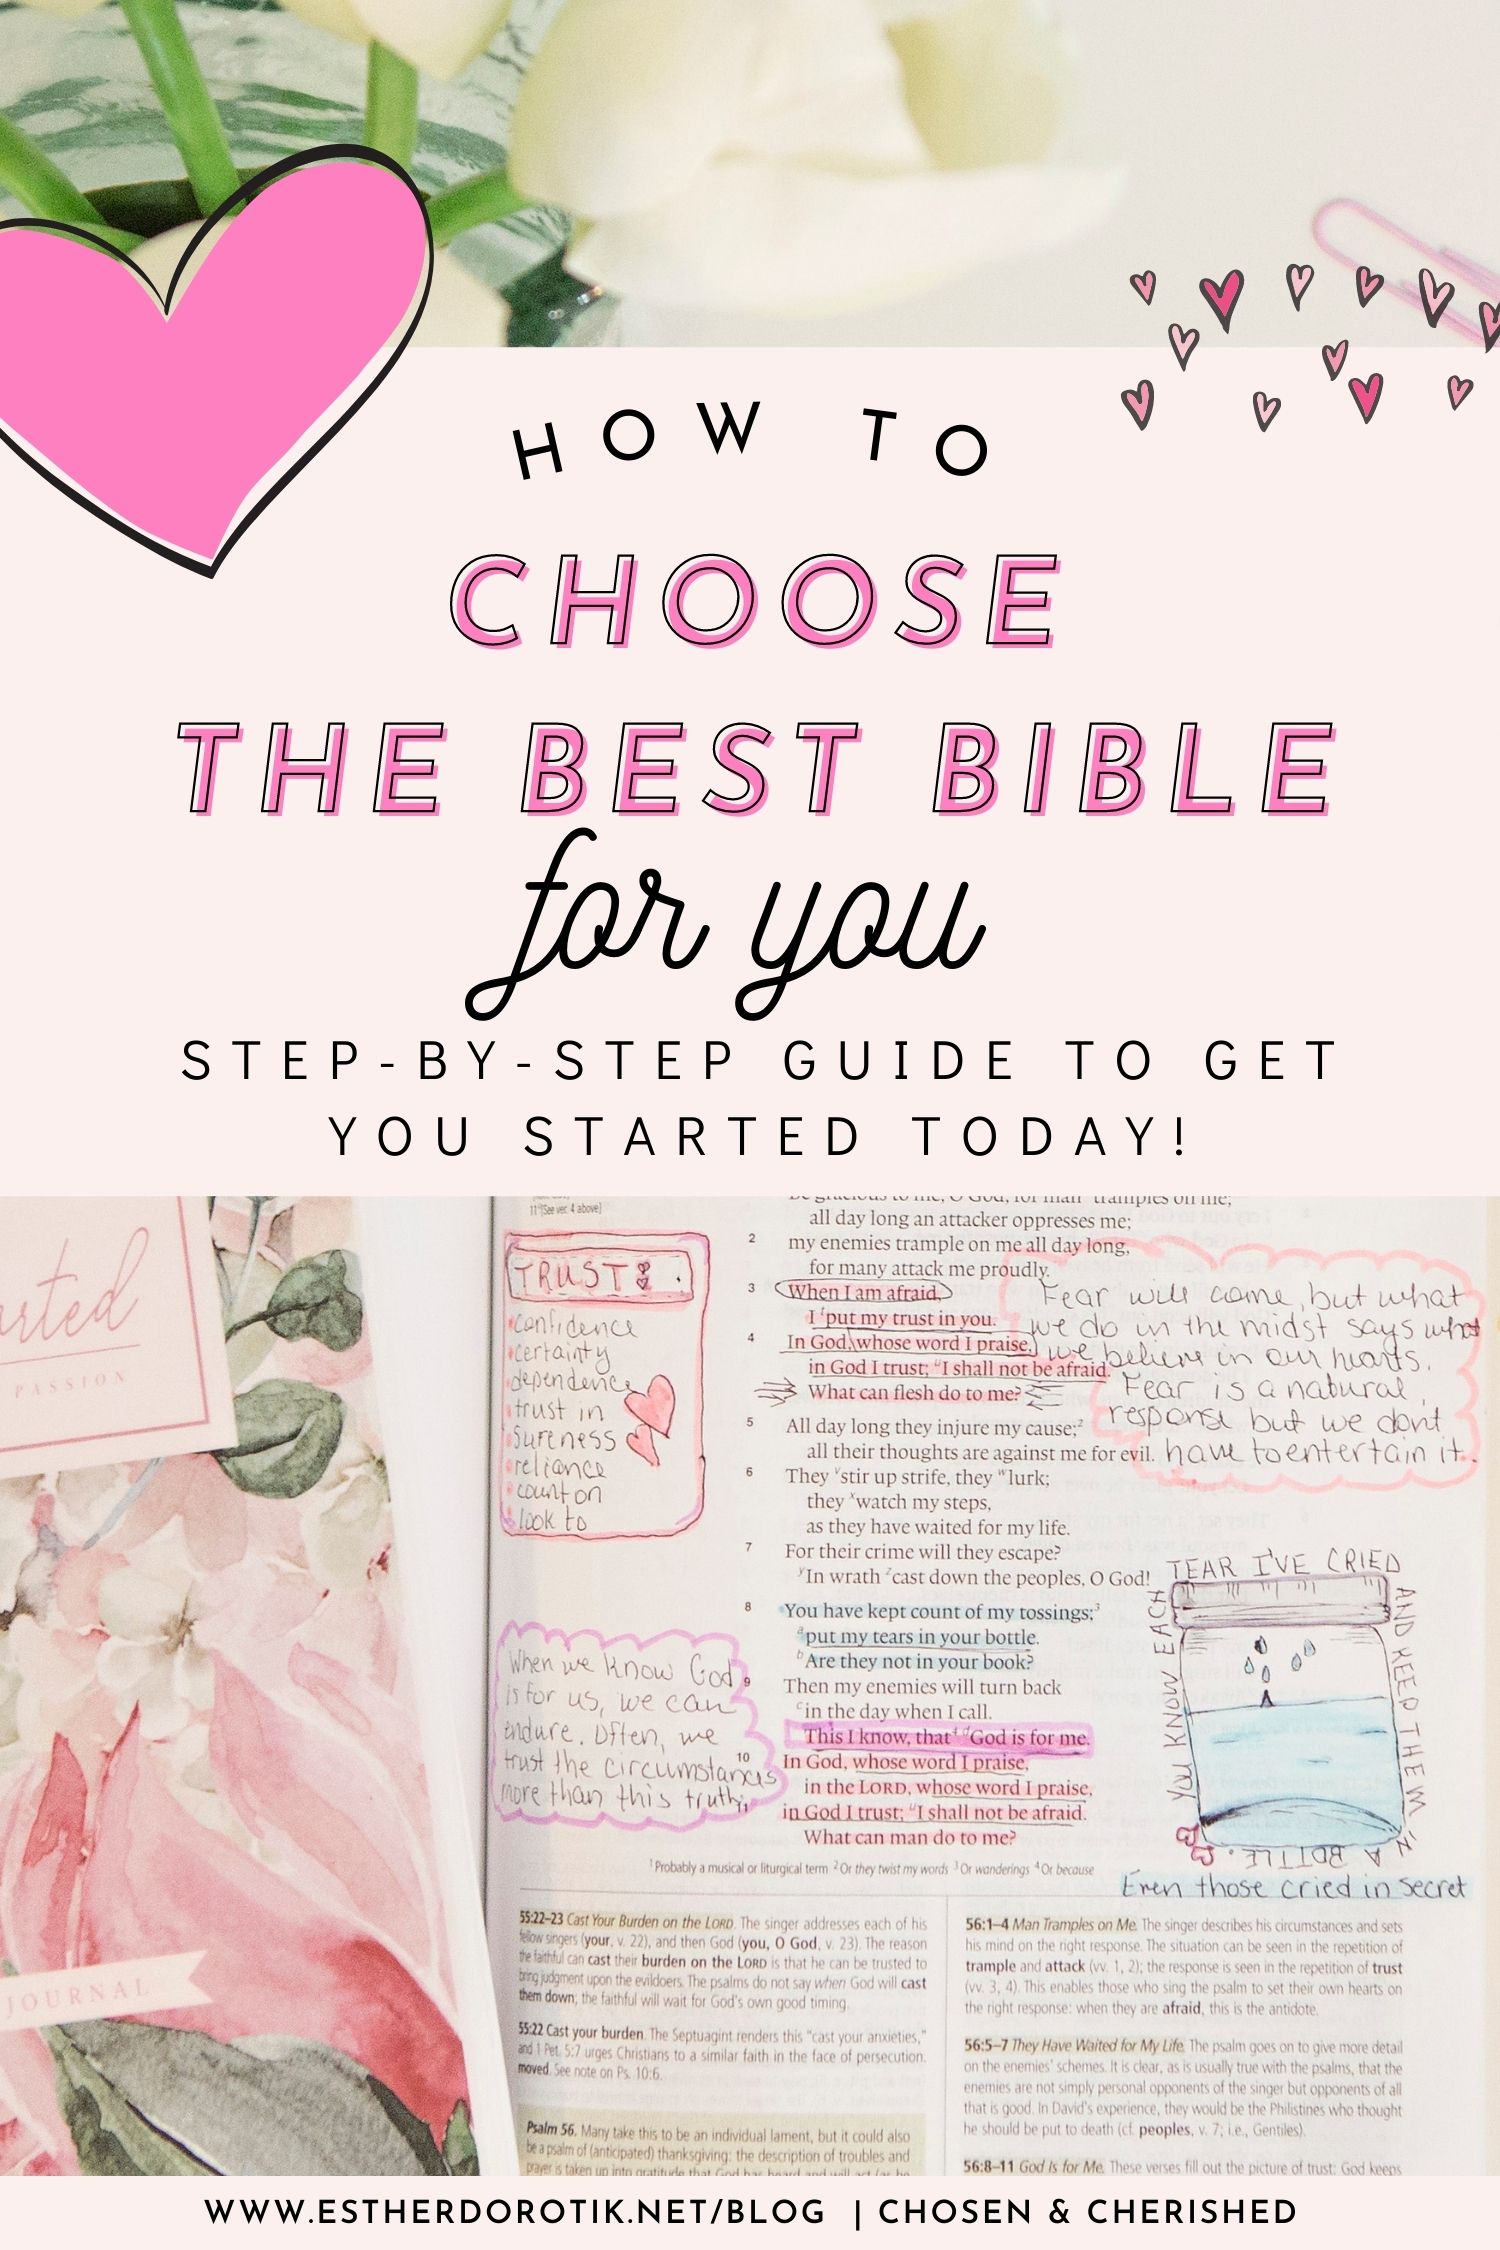 EVERYTHING-YOU-NEED-TO-KNOW-TO-CHOOSE-THE-BEST-BIBLE